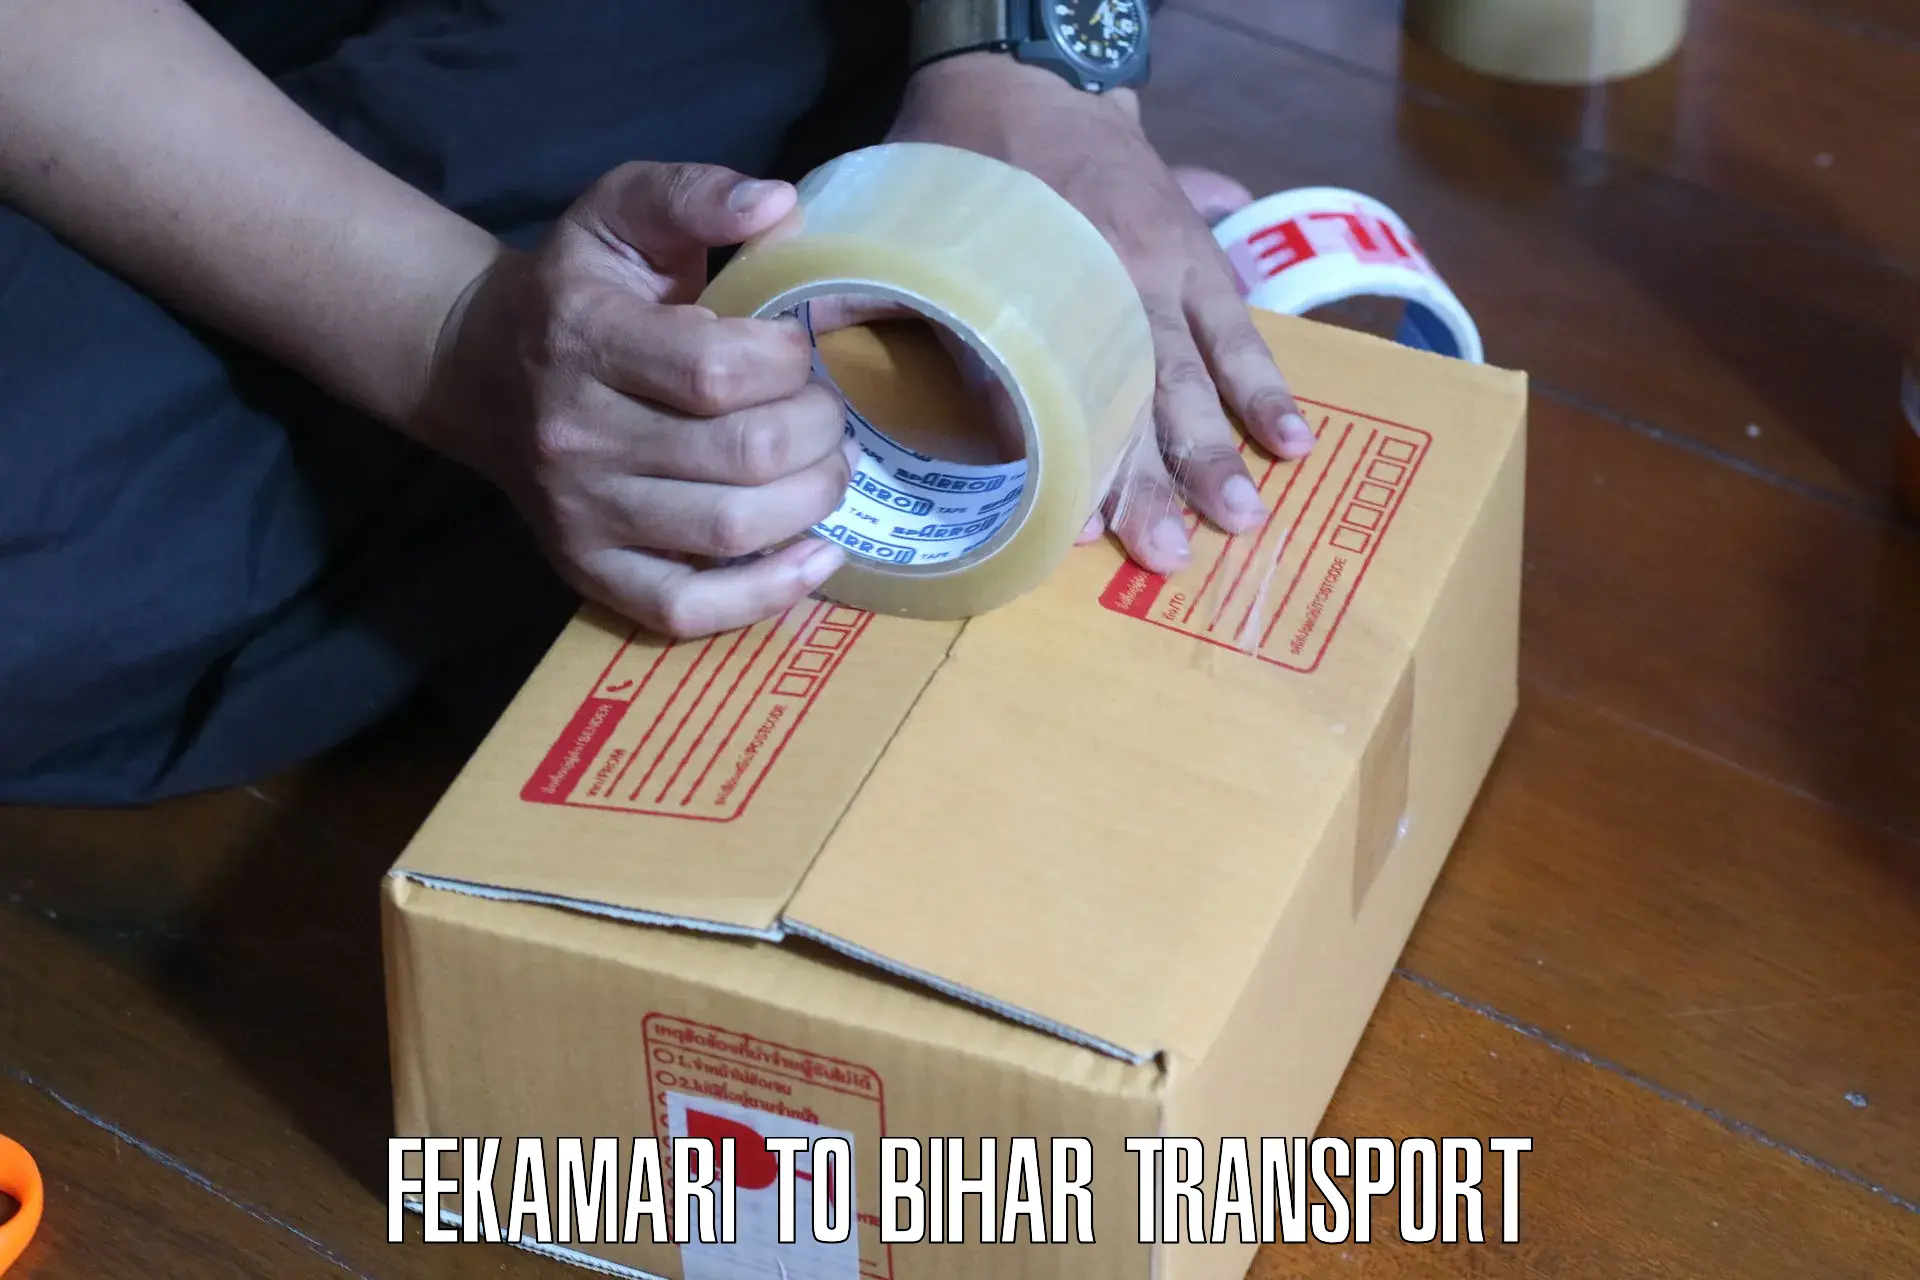 Commercial transport service Fekamari to Bhojpur